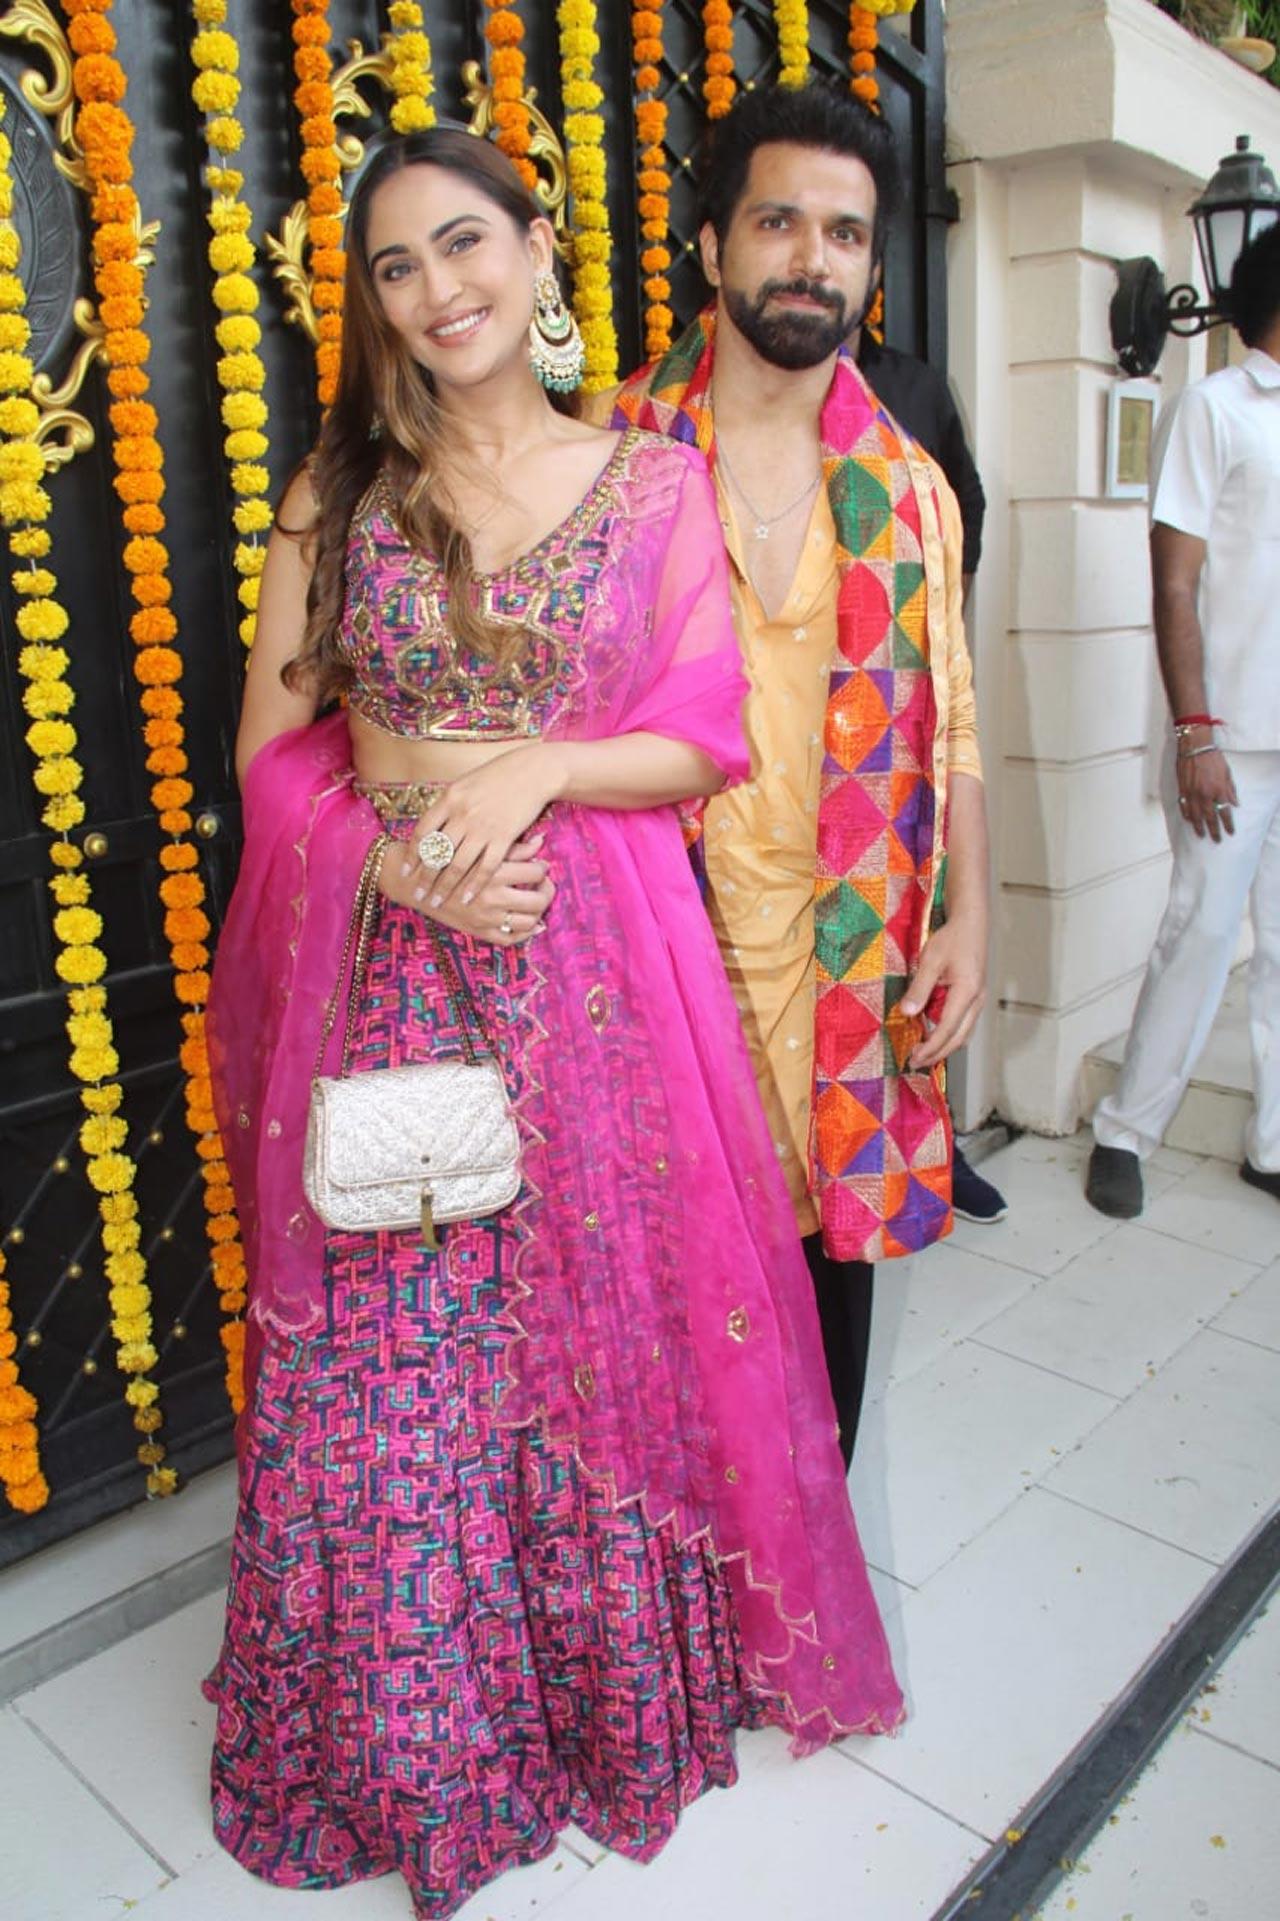 Krystle D'Souza posed with her BFF Rithvik Dhanjani as they arrived together at the brunch